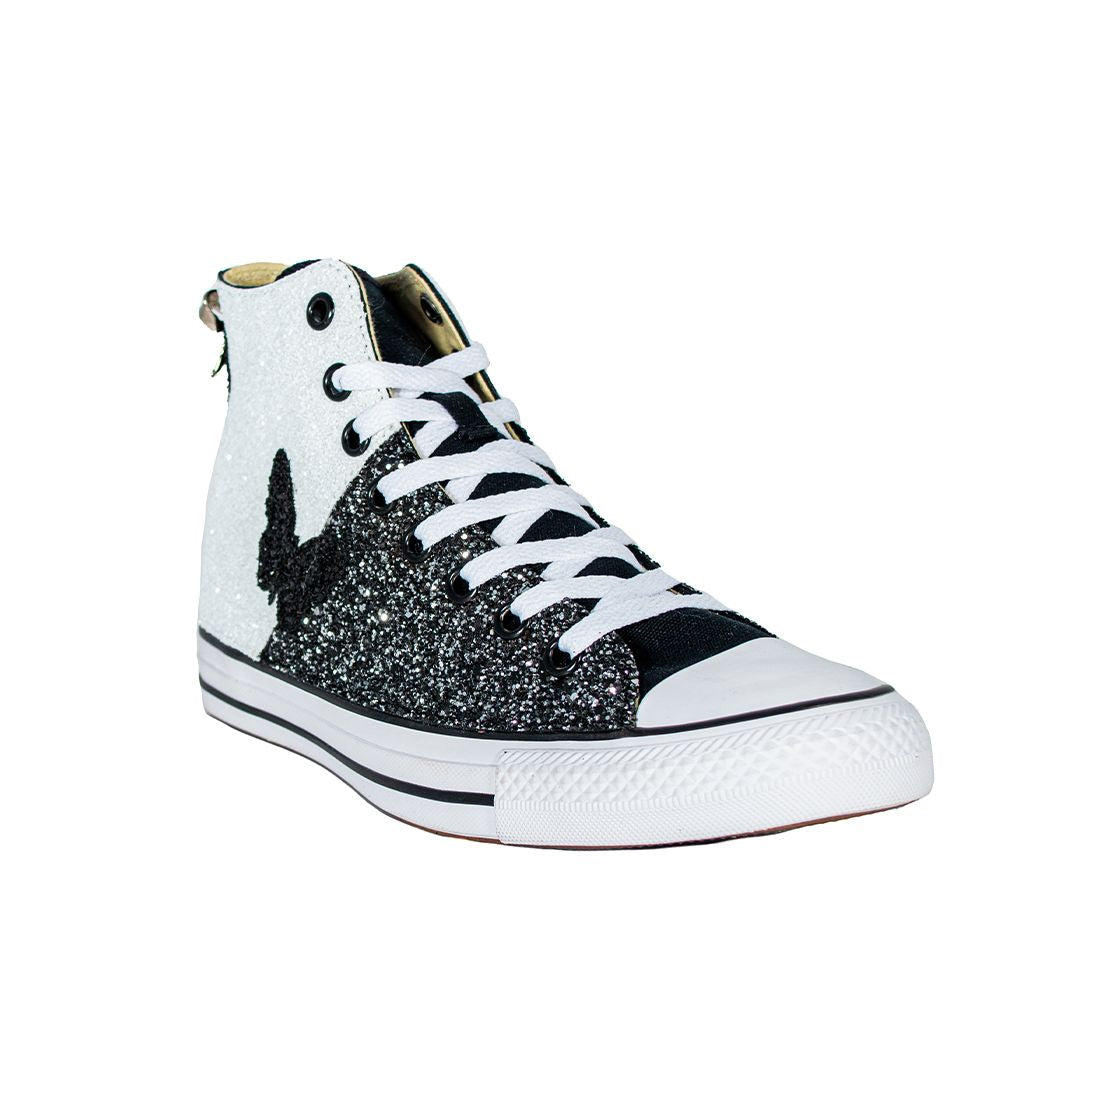 CONVERSE PERSONALIZZATE NERA BUTTERFLY